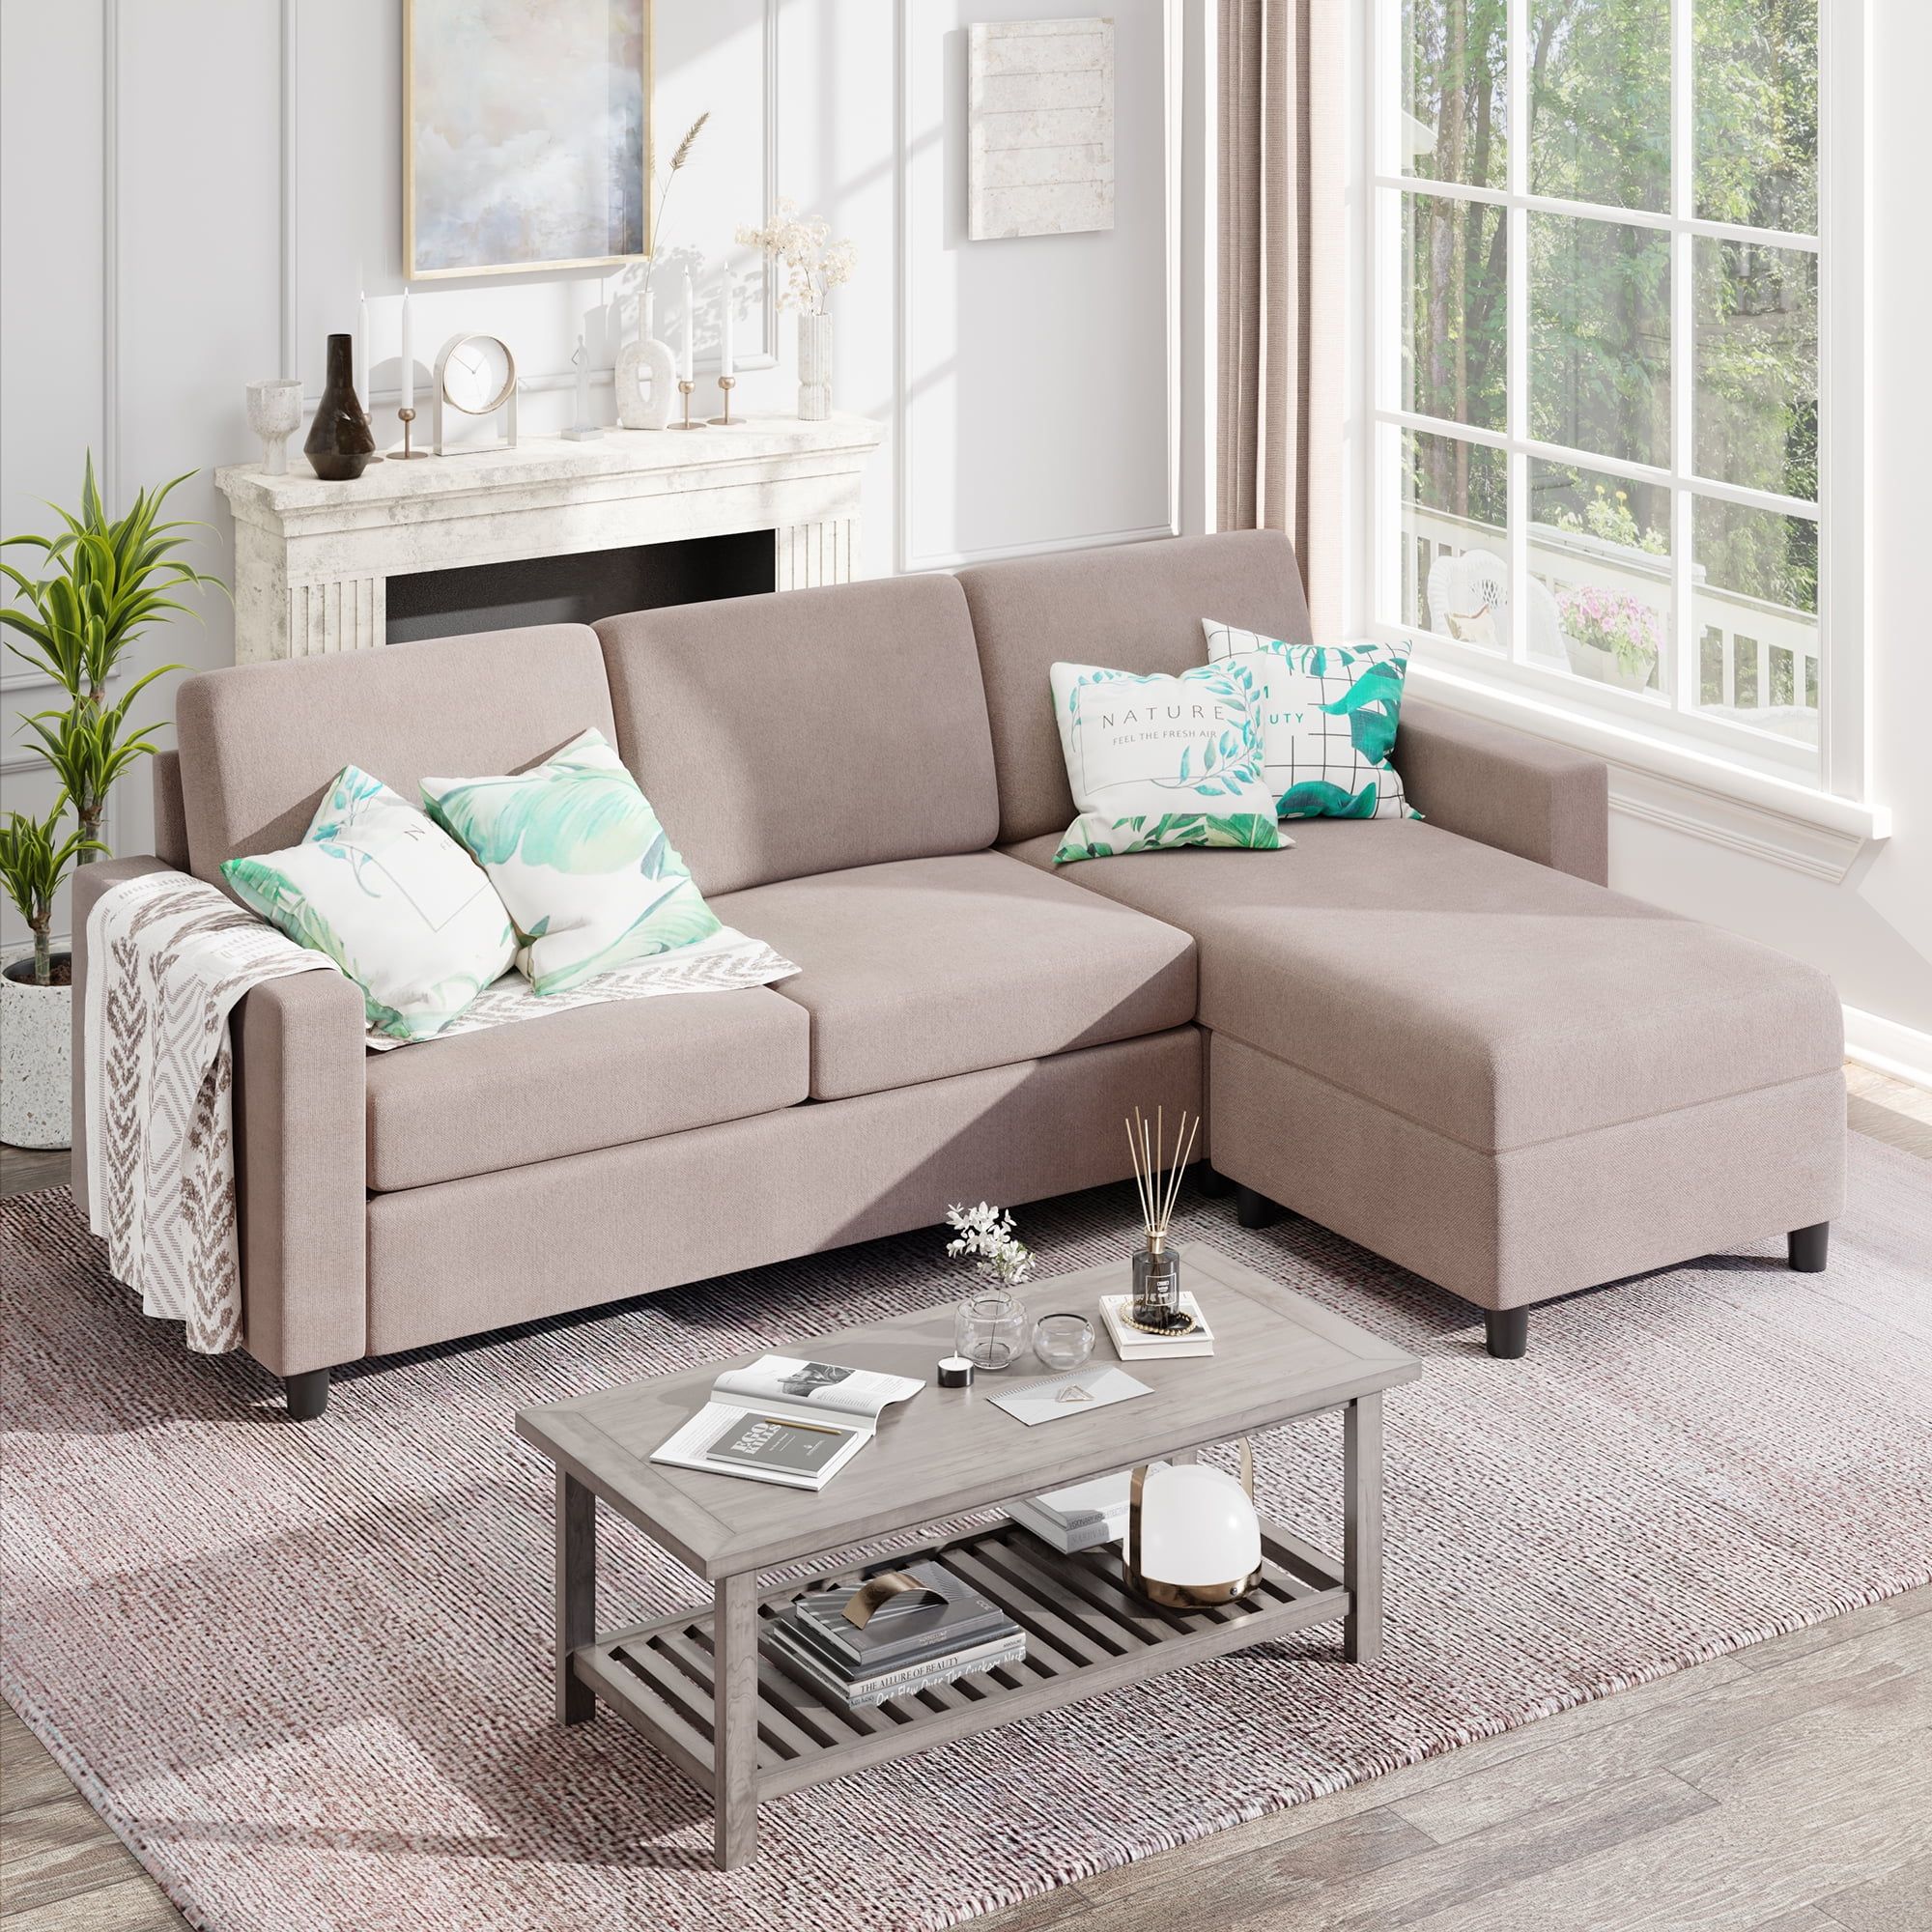 Sobaniilo Convertible Sectional Sofa Couch, Modern Linen Fabric L Shaped 3 Seat  Sofa Sectional With Reversible Chaise For Small Space, Tan – Walmart Inside 3 Seat Convertible Sectional Sofas (Photo 1 of 15)